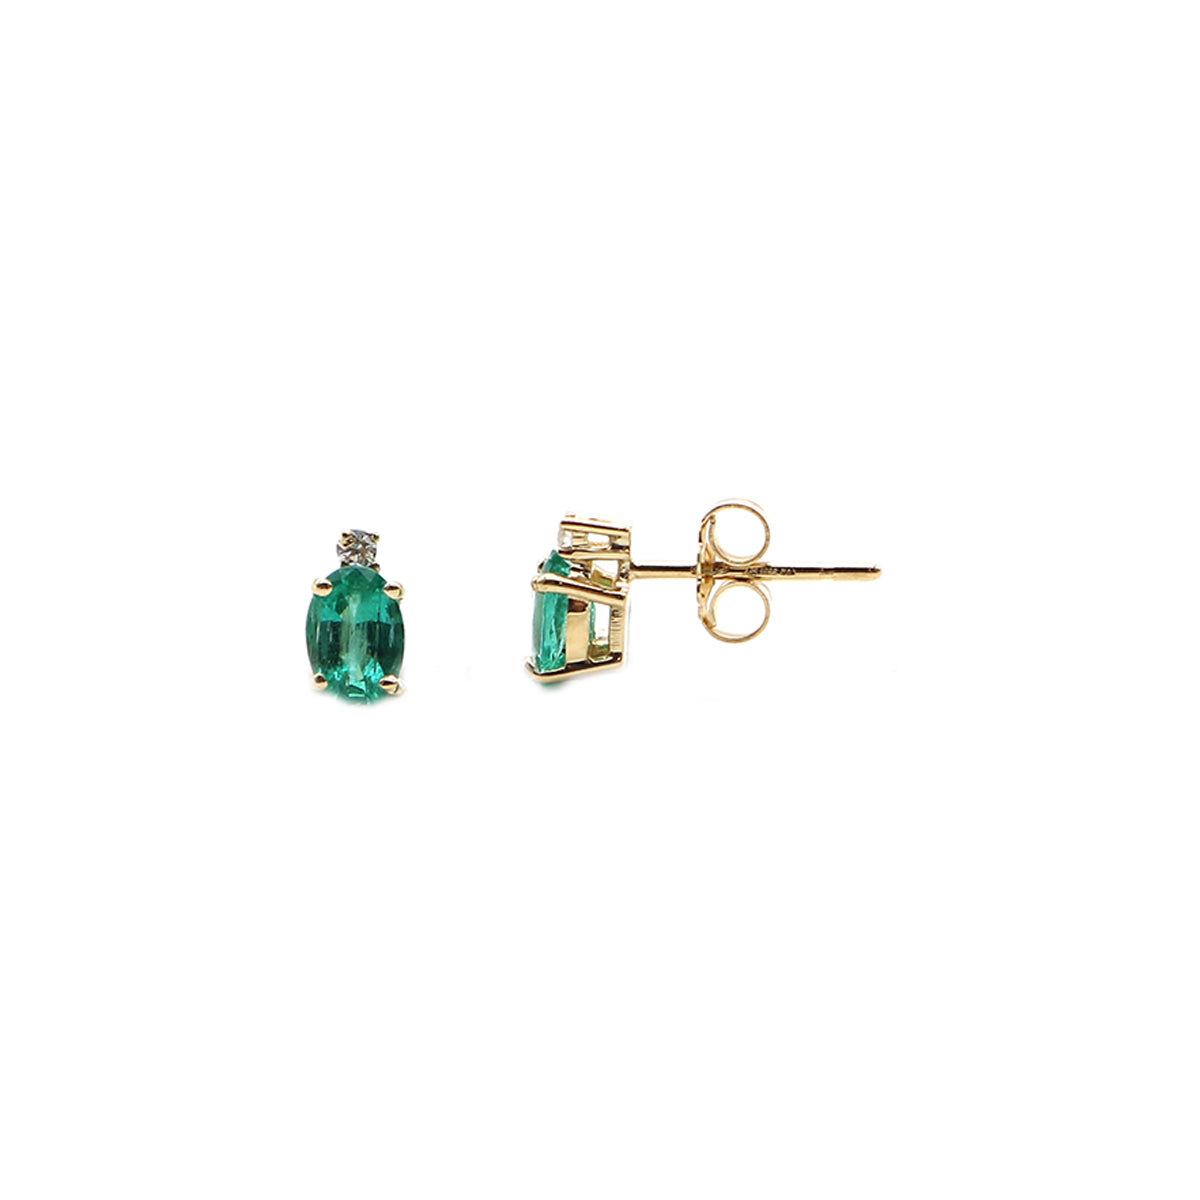 306 gold earrings with emerald